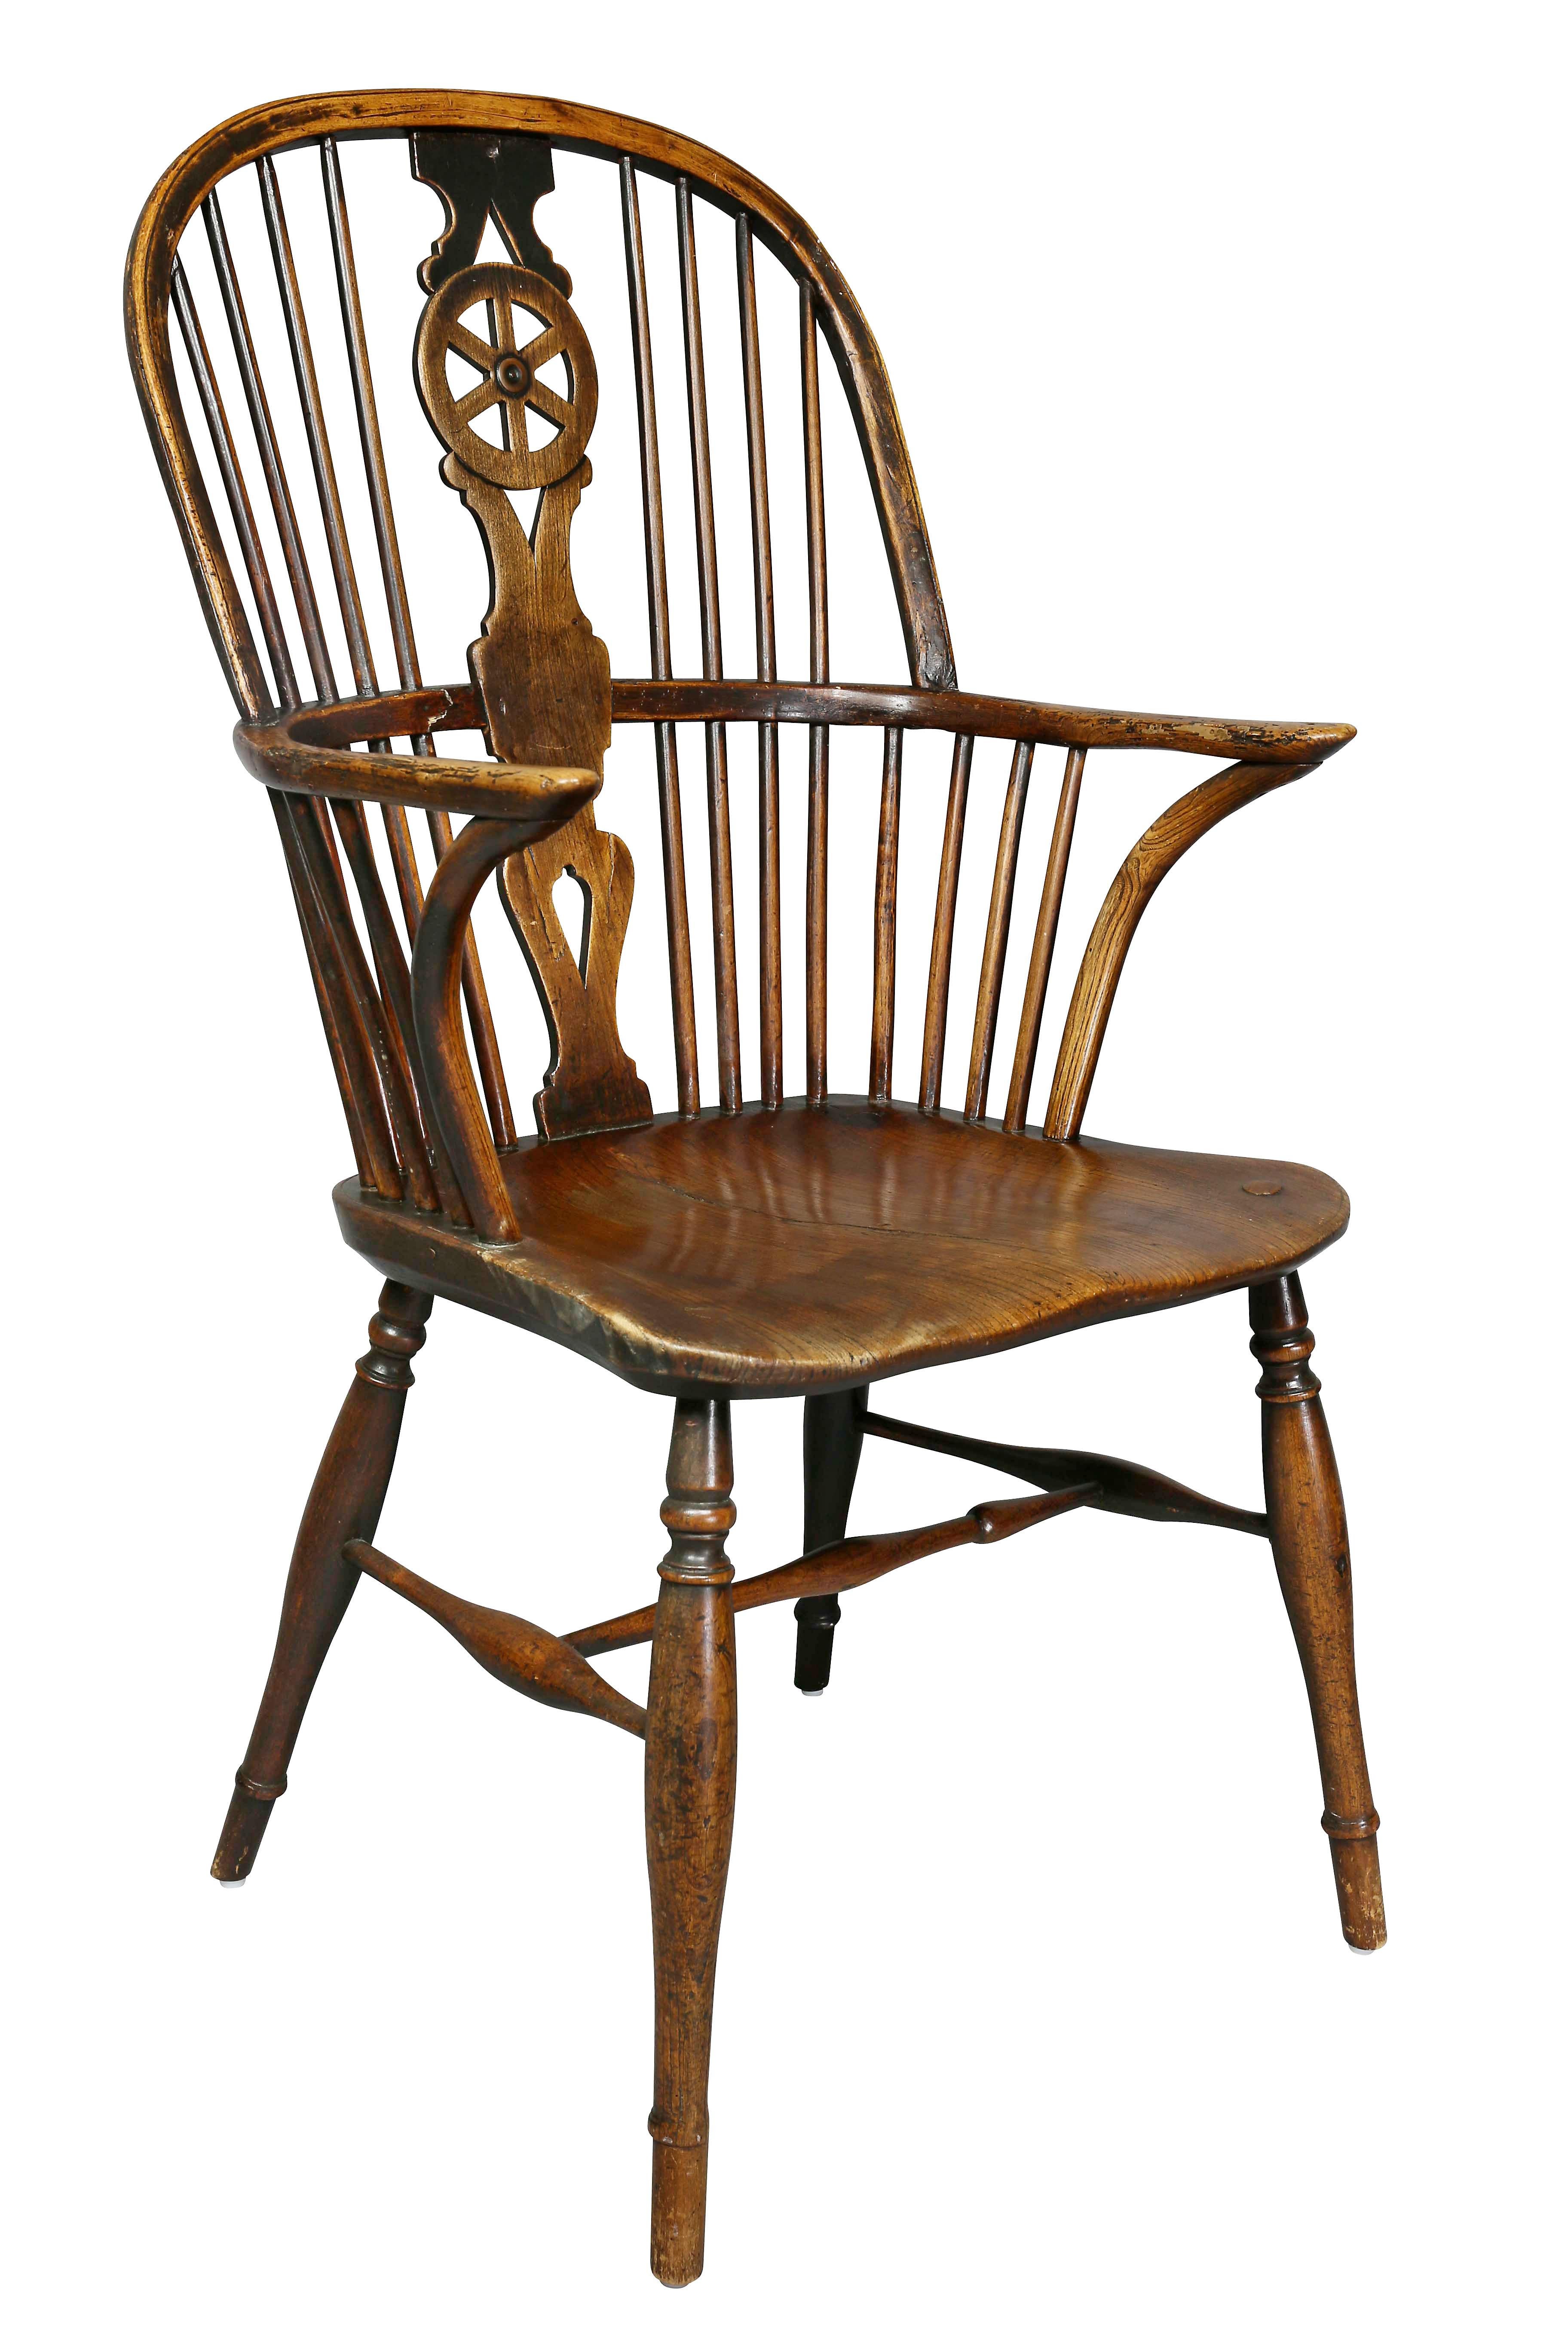 Very well matched set with one chair slightly different, comprising two-arm and six sides. Arched backs with wheel splat, shaped seat, turned tapered legs with H stretchers. Made originally in the Wycombe area of Buckinghamshire.